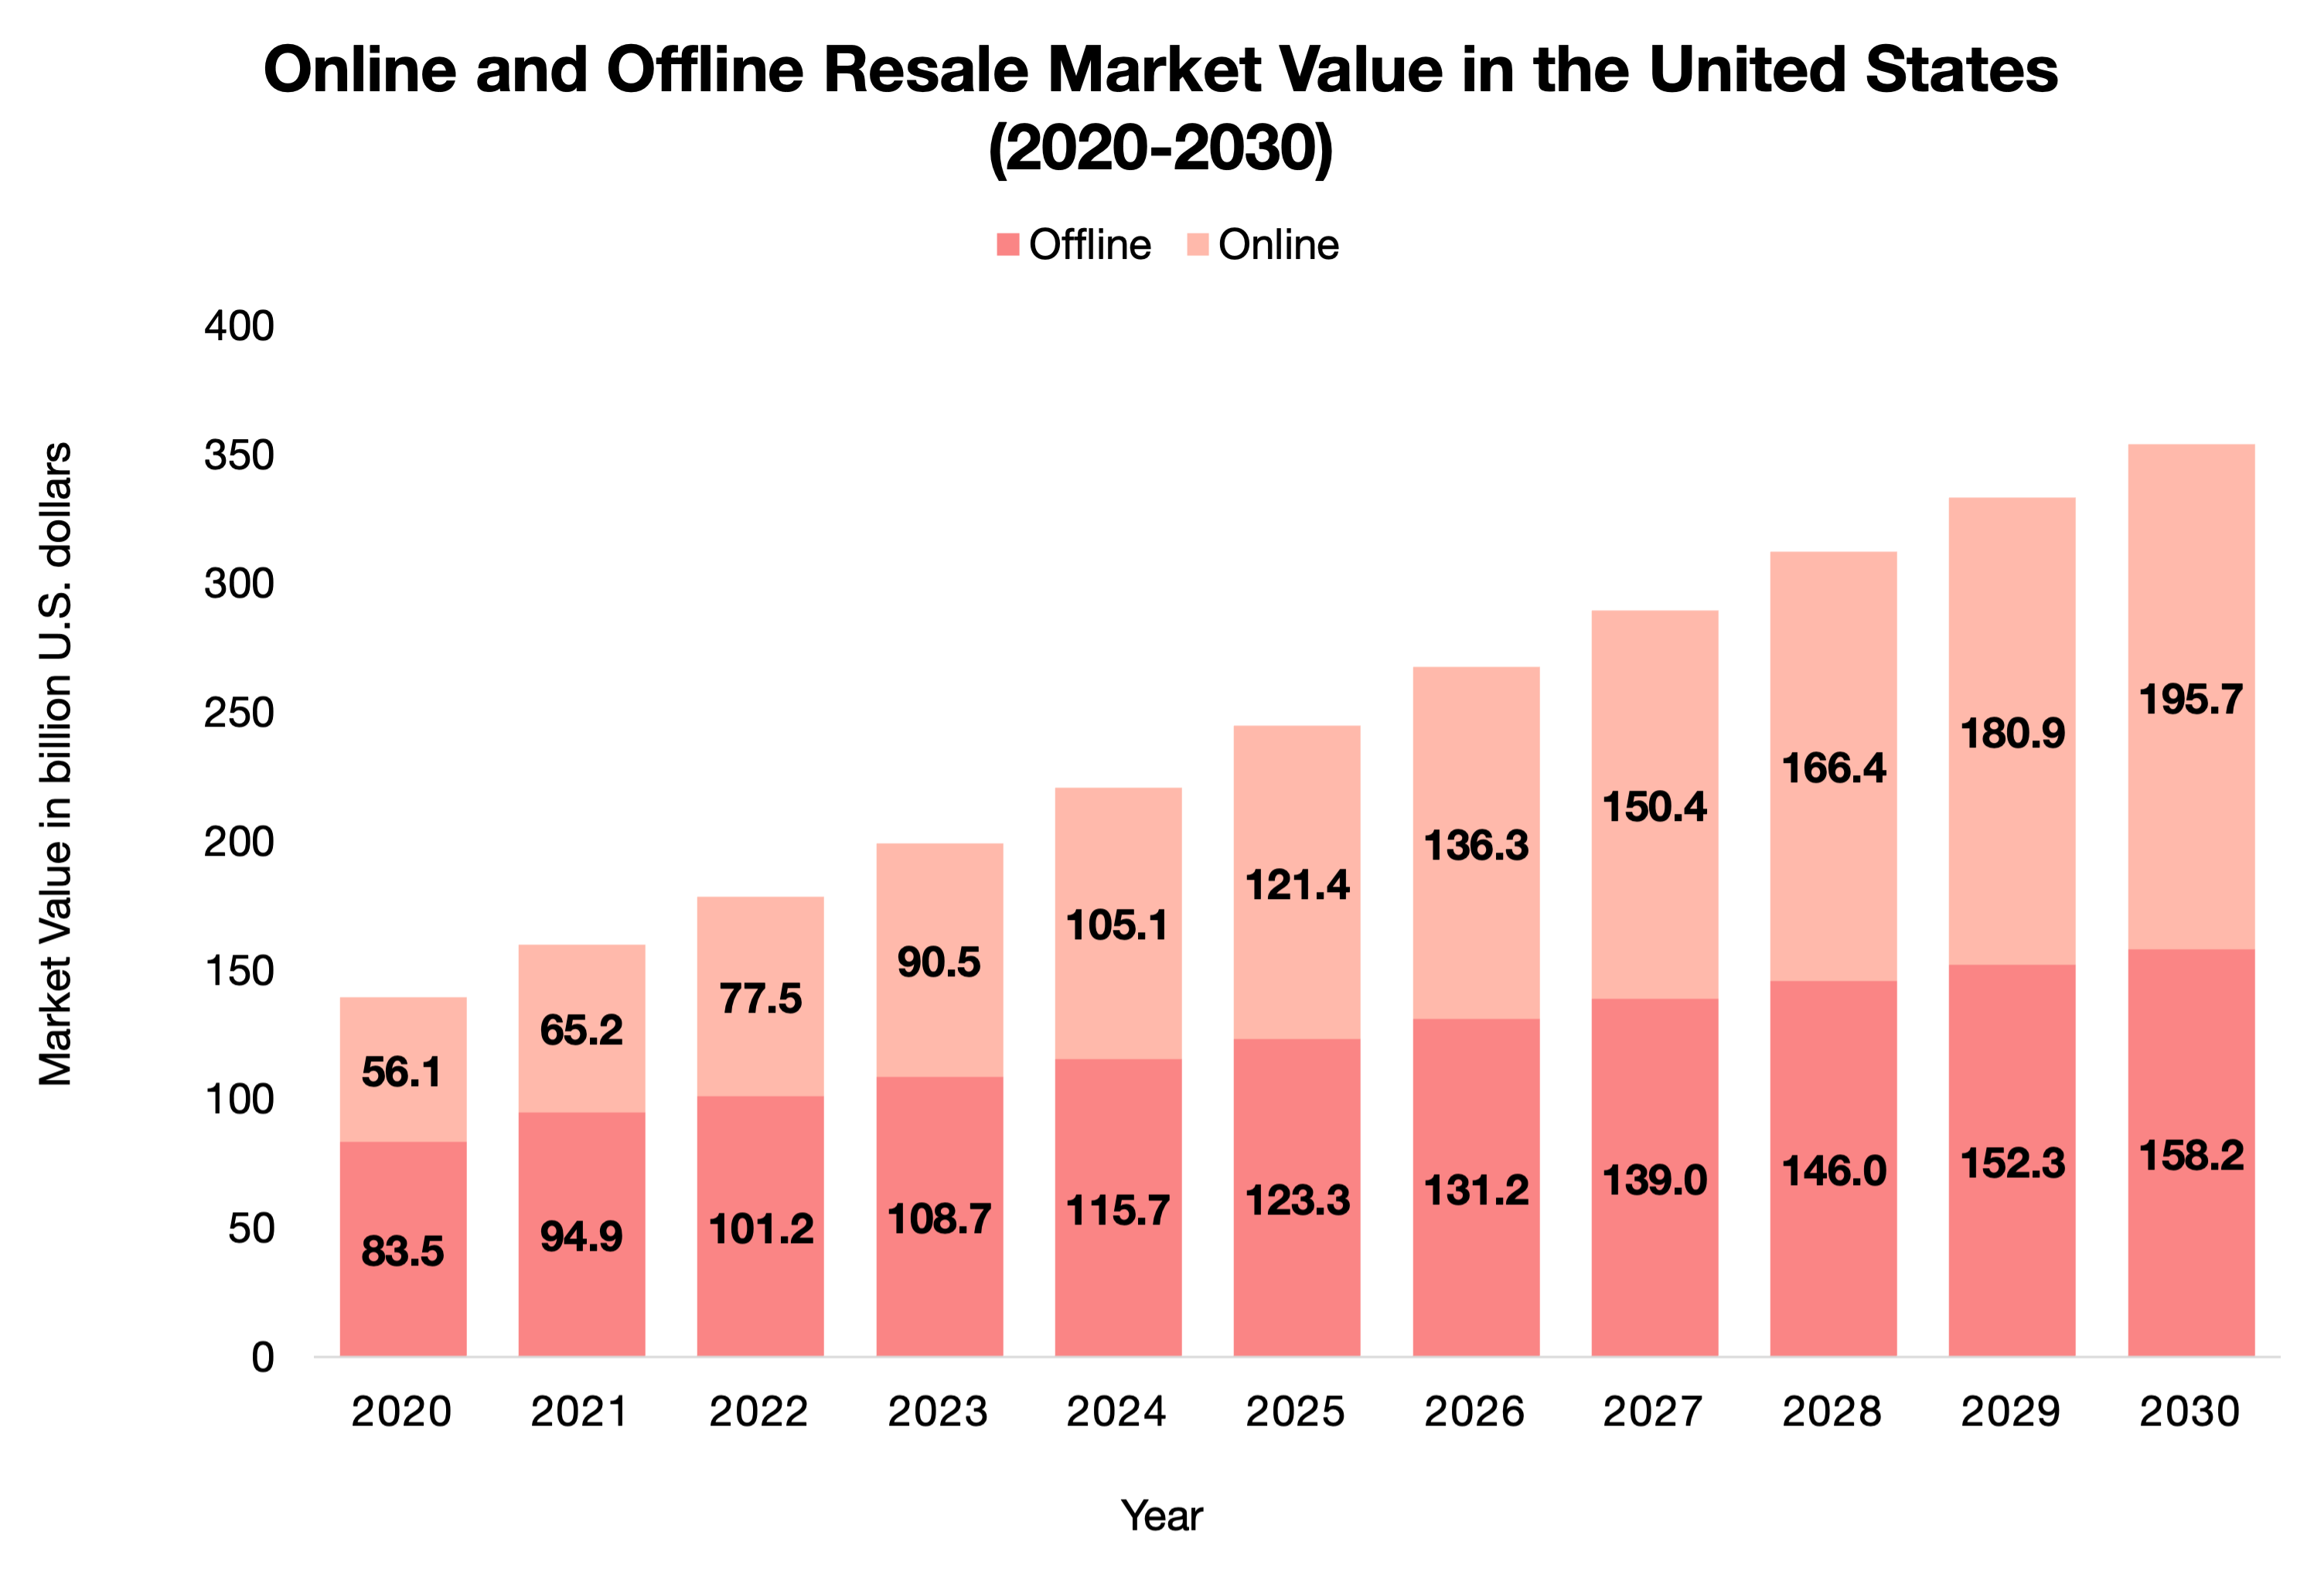 The rise of luxury fashion's resale market